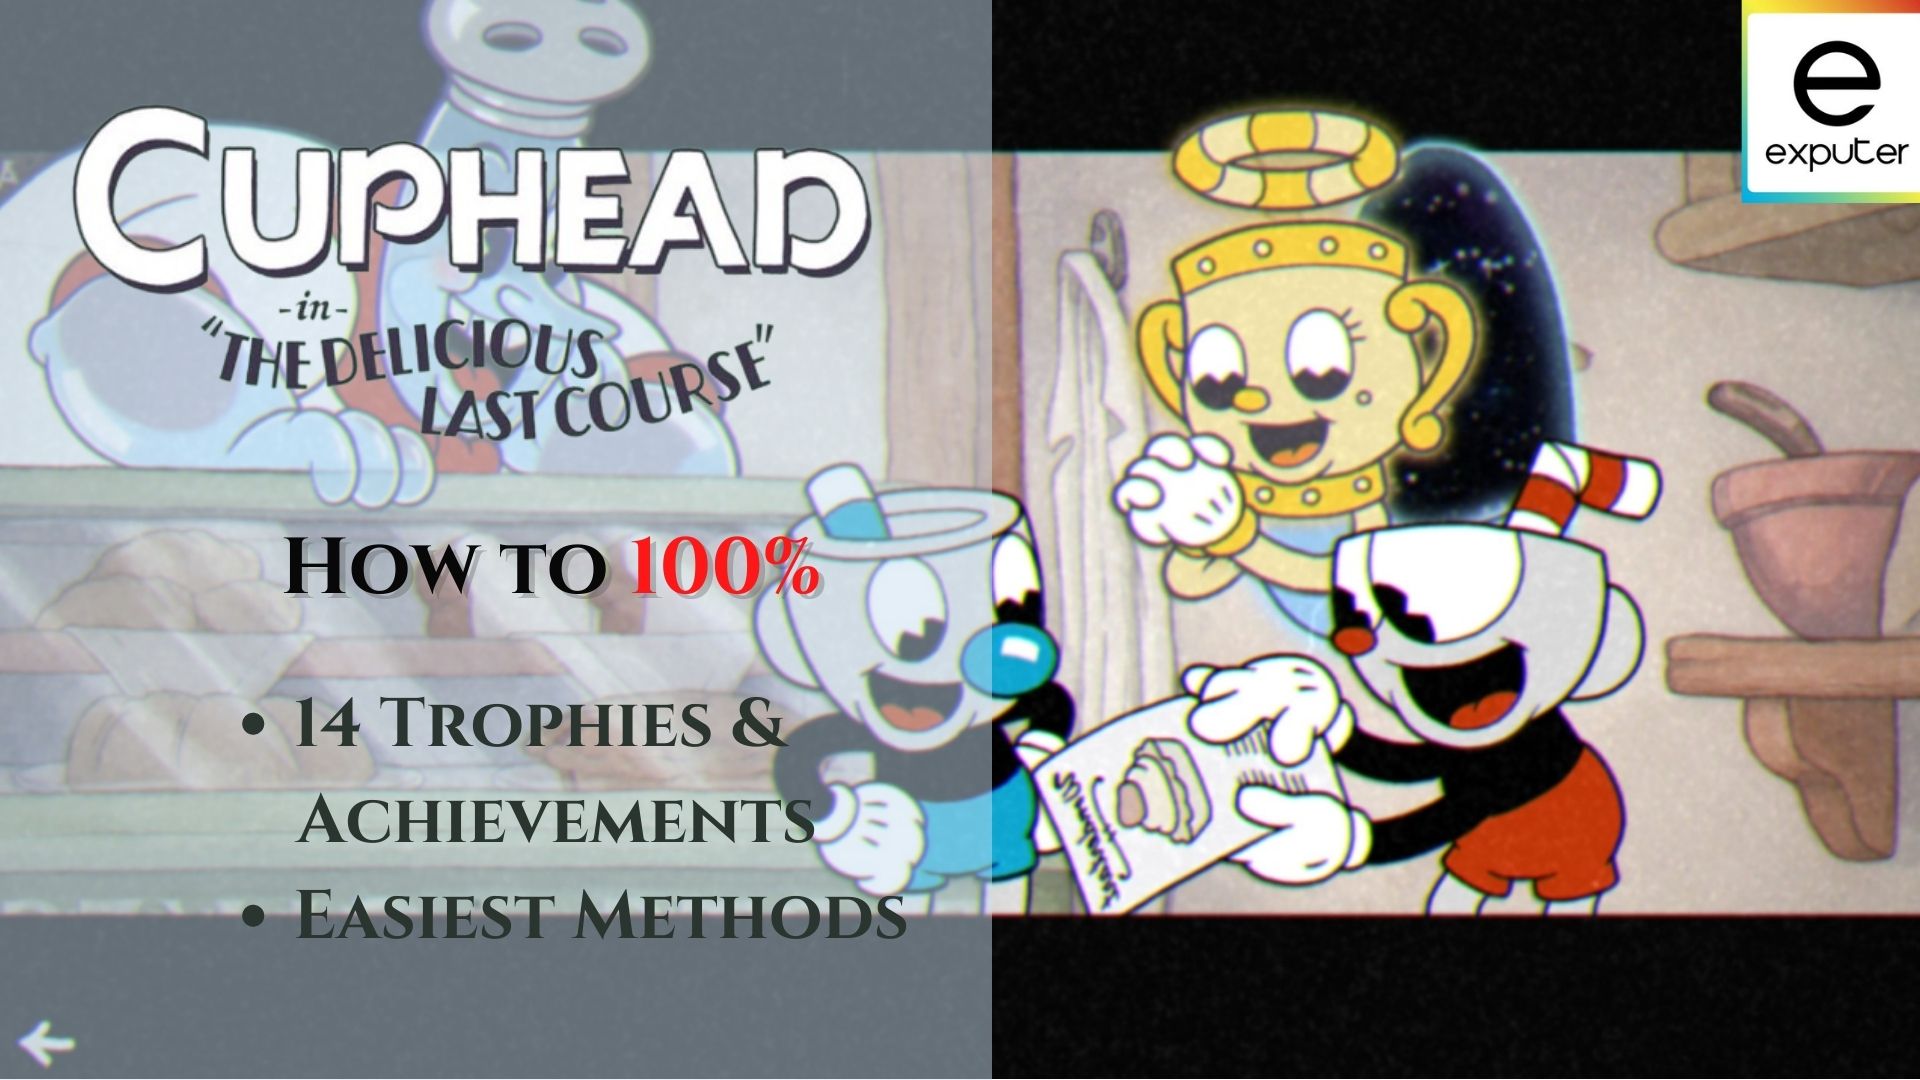 Improve your DLC…with Patch 1.3.3 !! · Cuphead update for 19 July 2022 ·  SteamDB